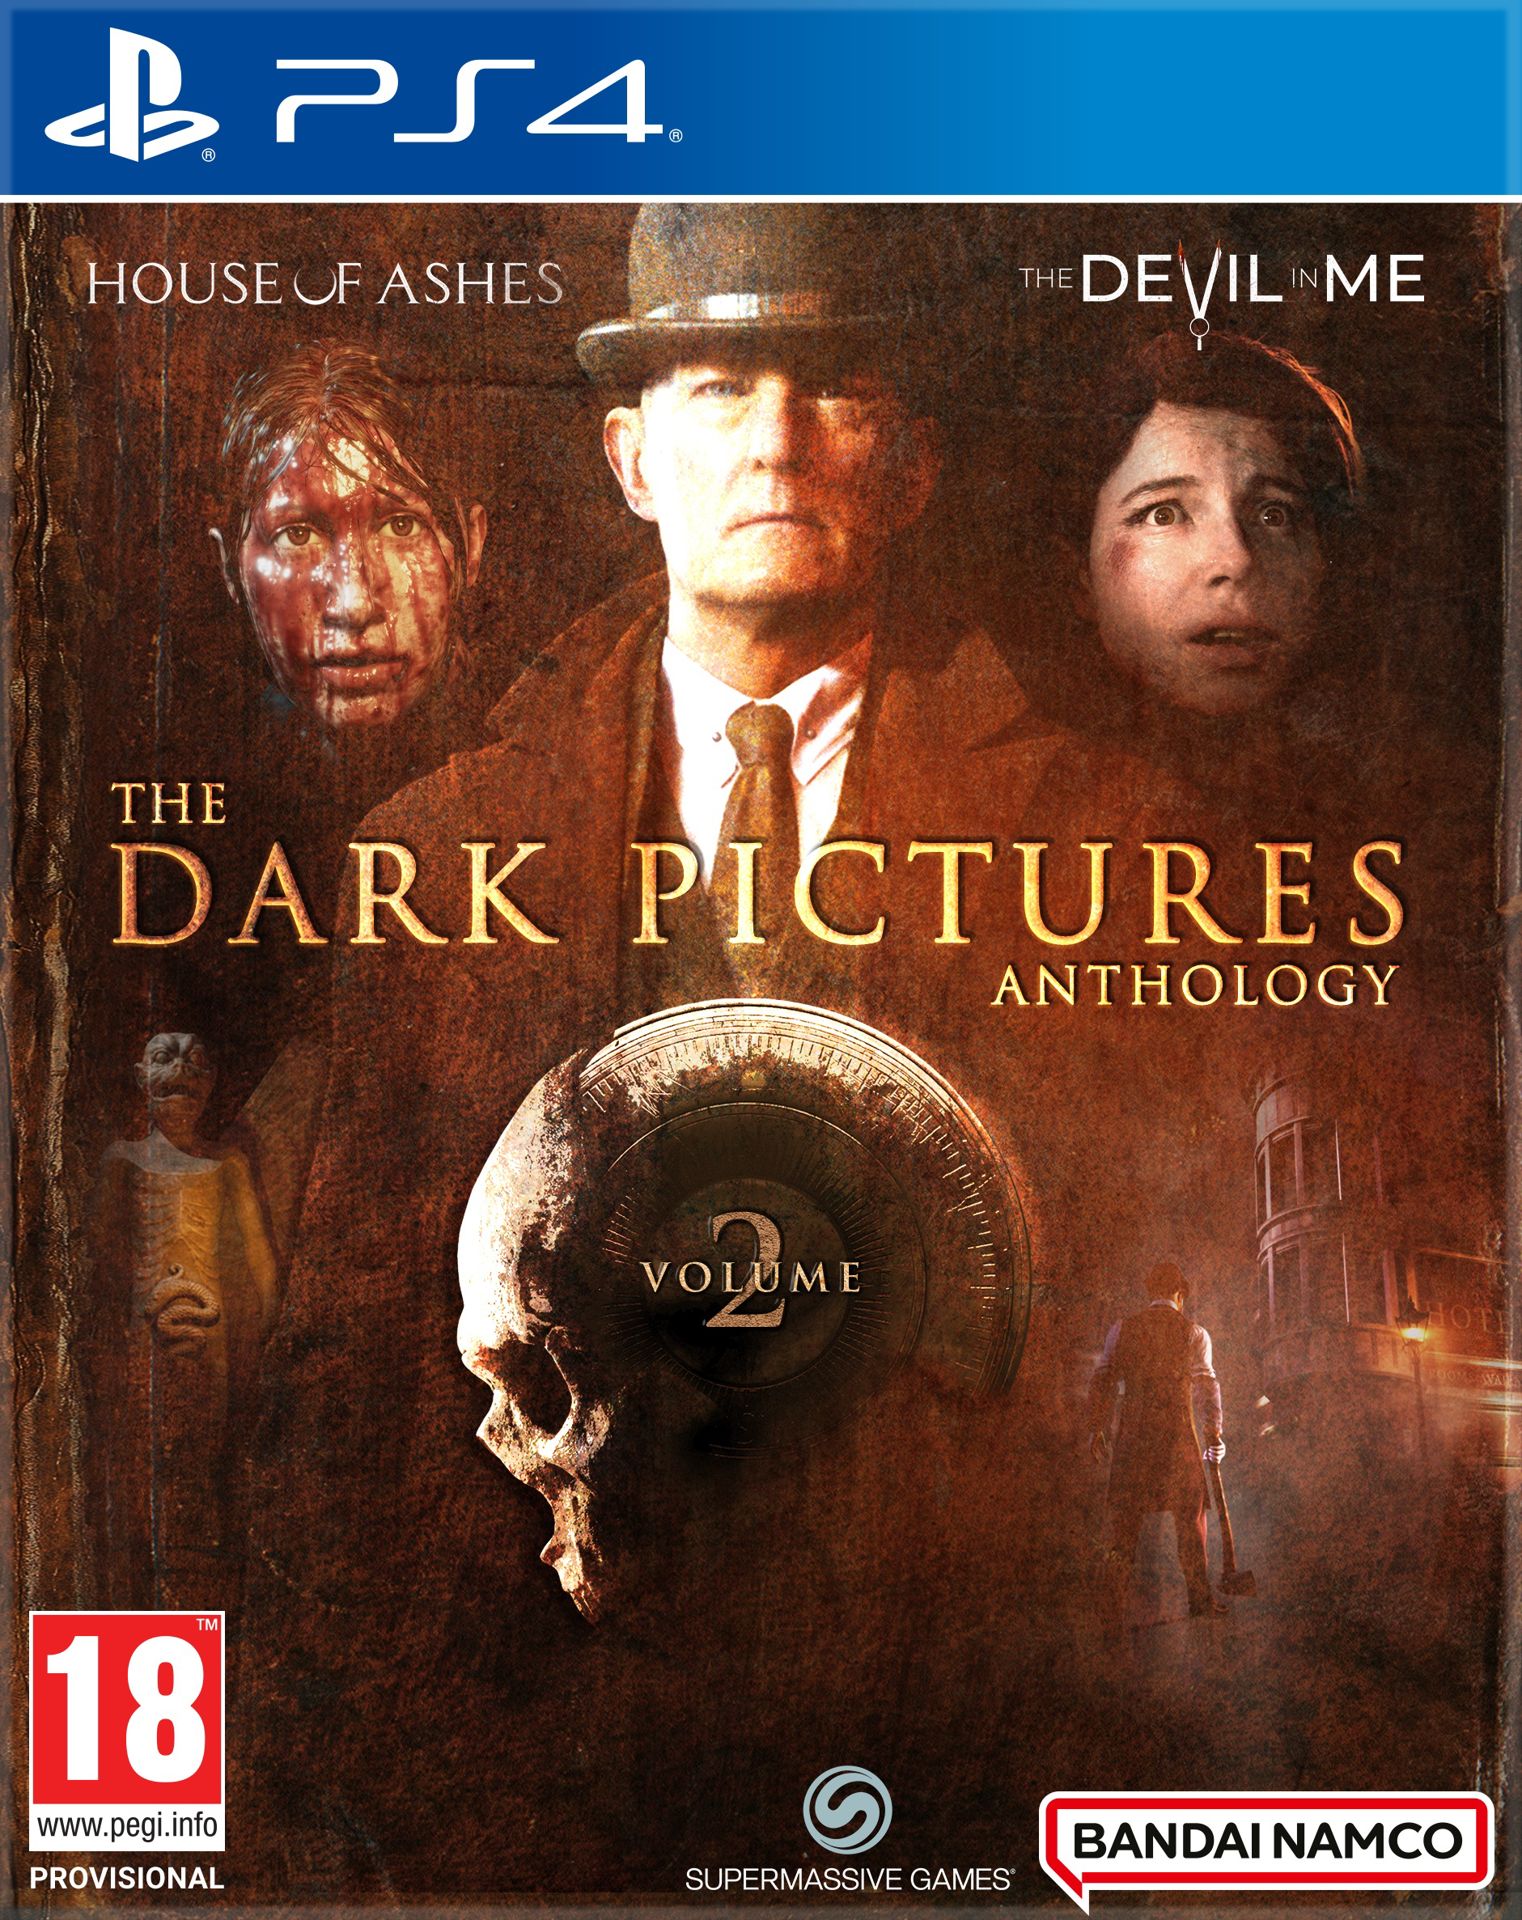 THE DARK PICTURES ANTHOLOGY: VOLUME 2